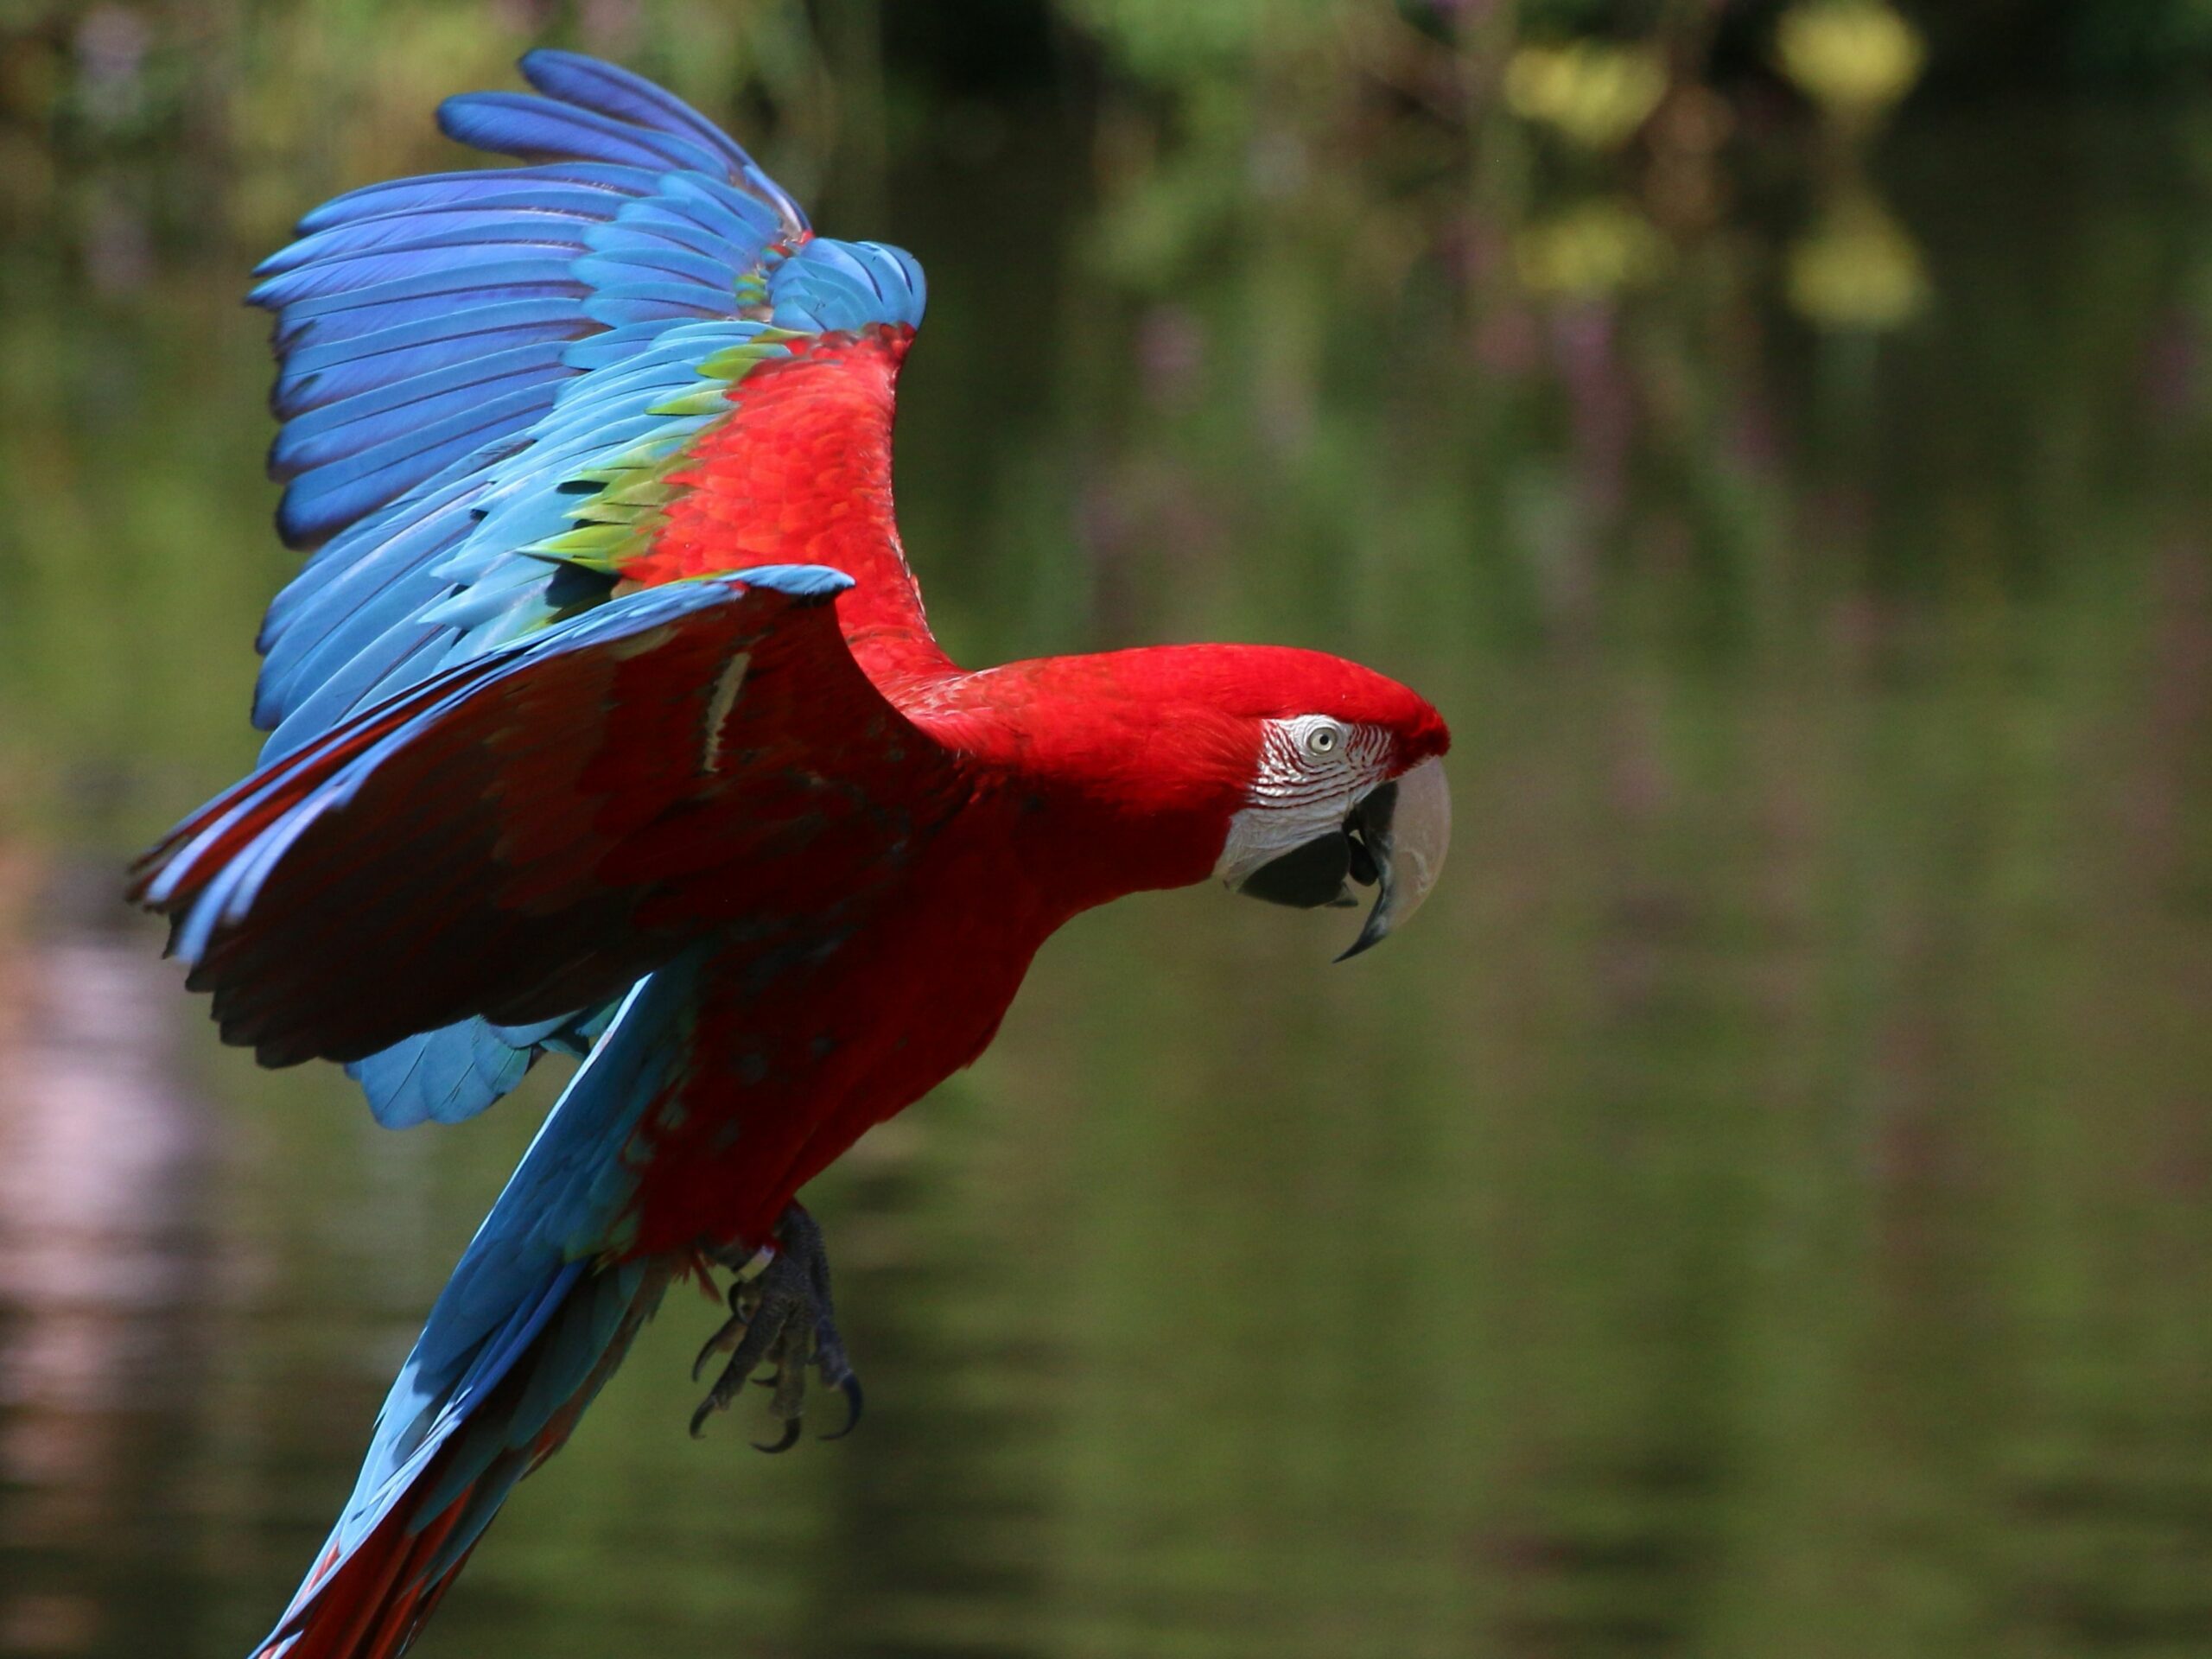 the red macaw flying find it at Bali Safari Park